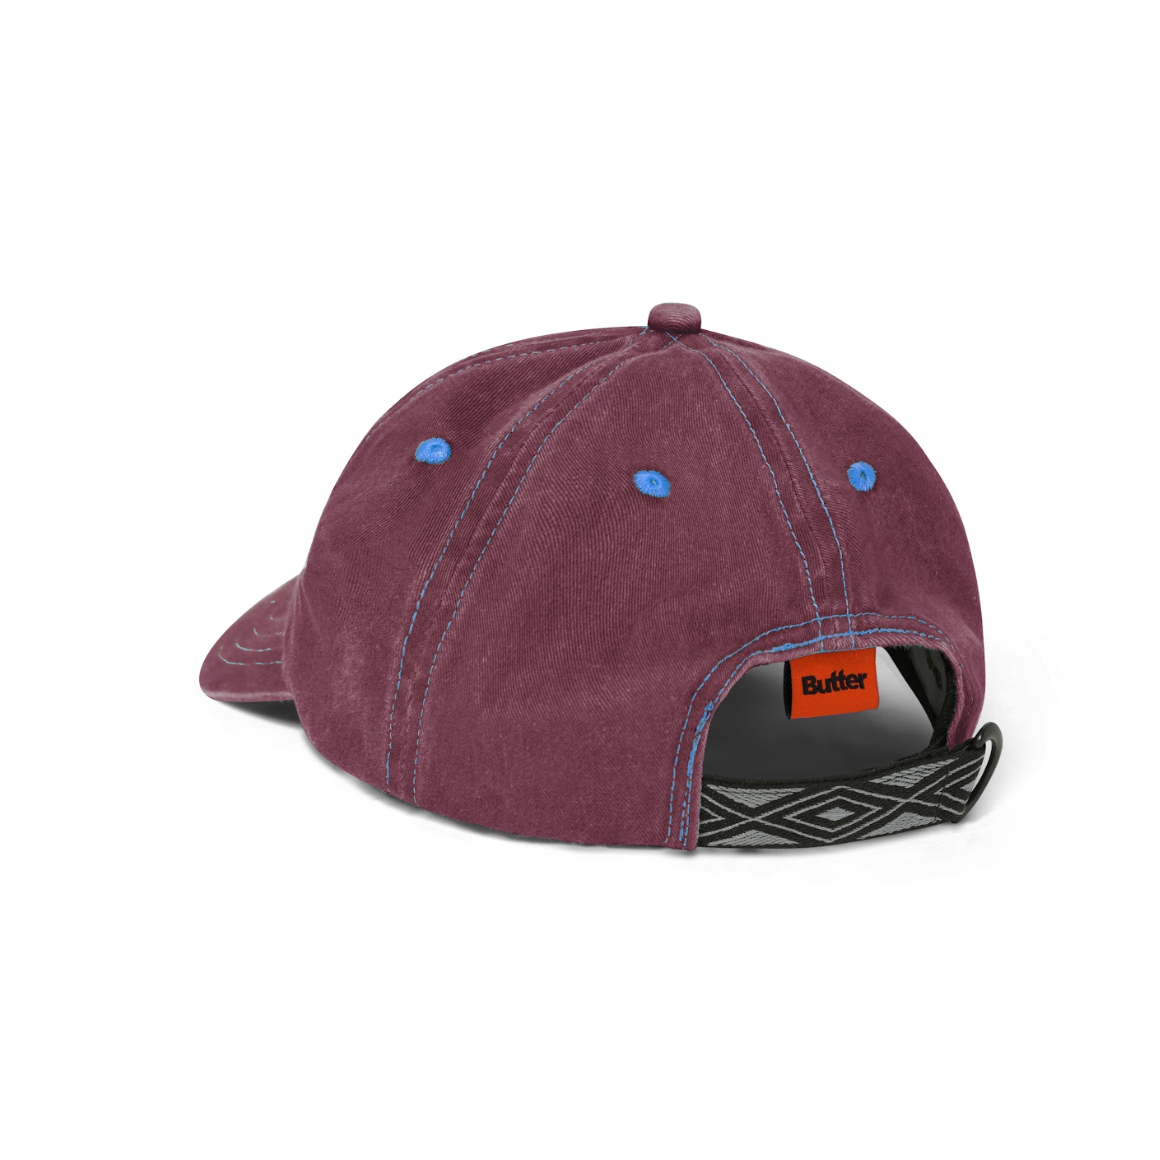 Butter Goods - Rounded Logo 6 Panel Cap - Sangria